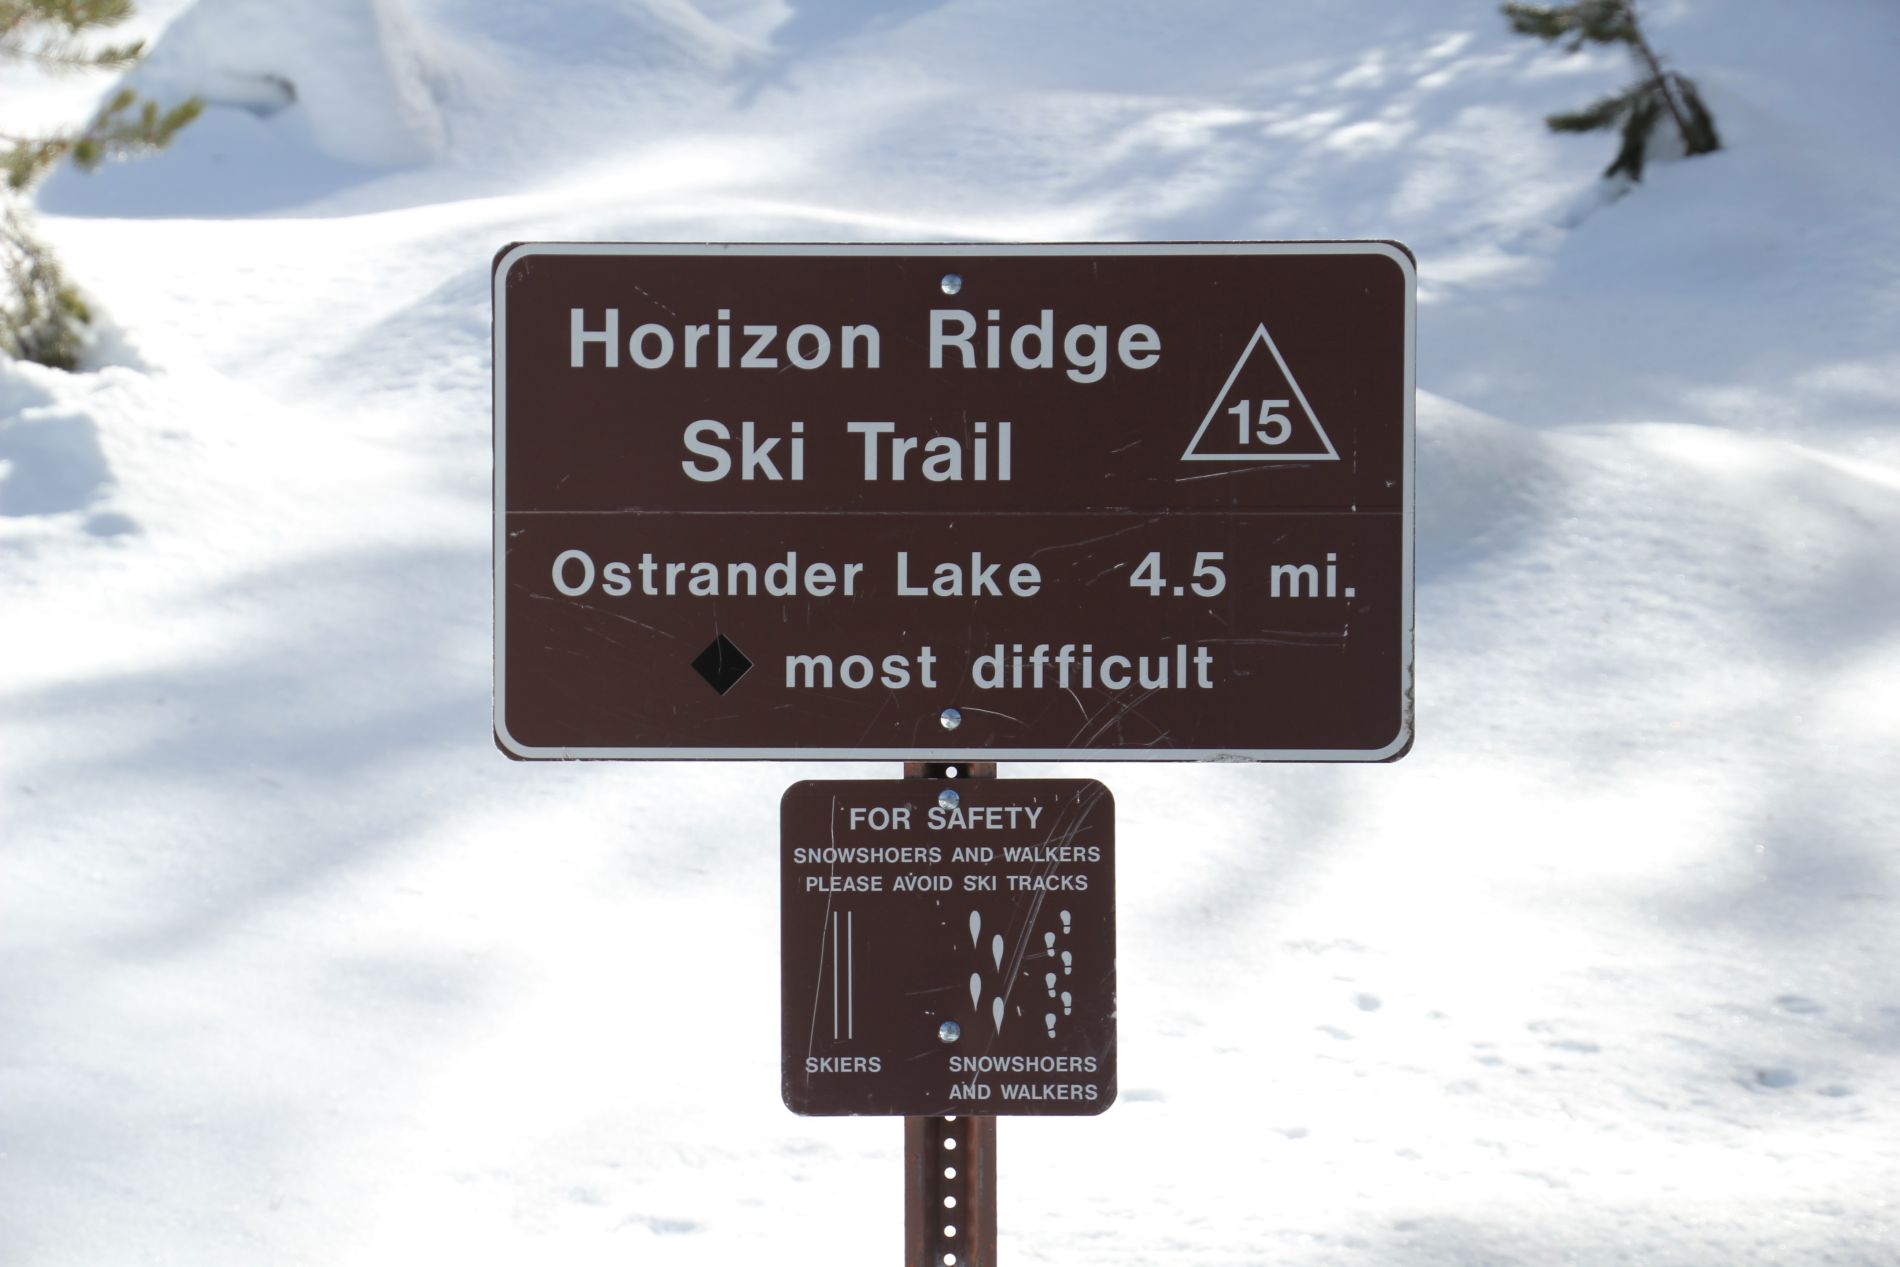 The Horizon Ridge Ski Trail signs warns that the route is "most difficult."